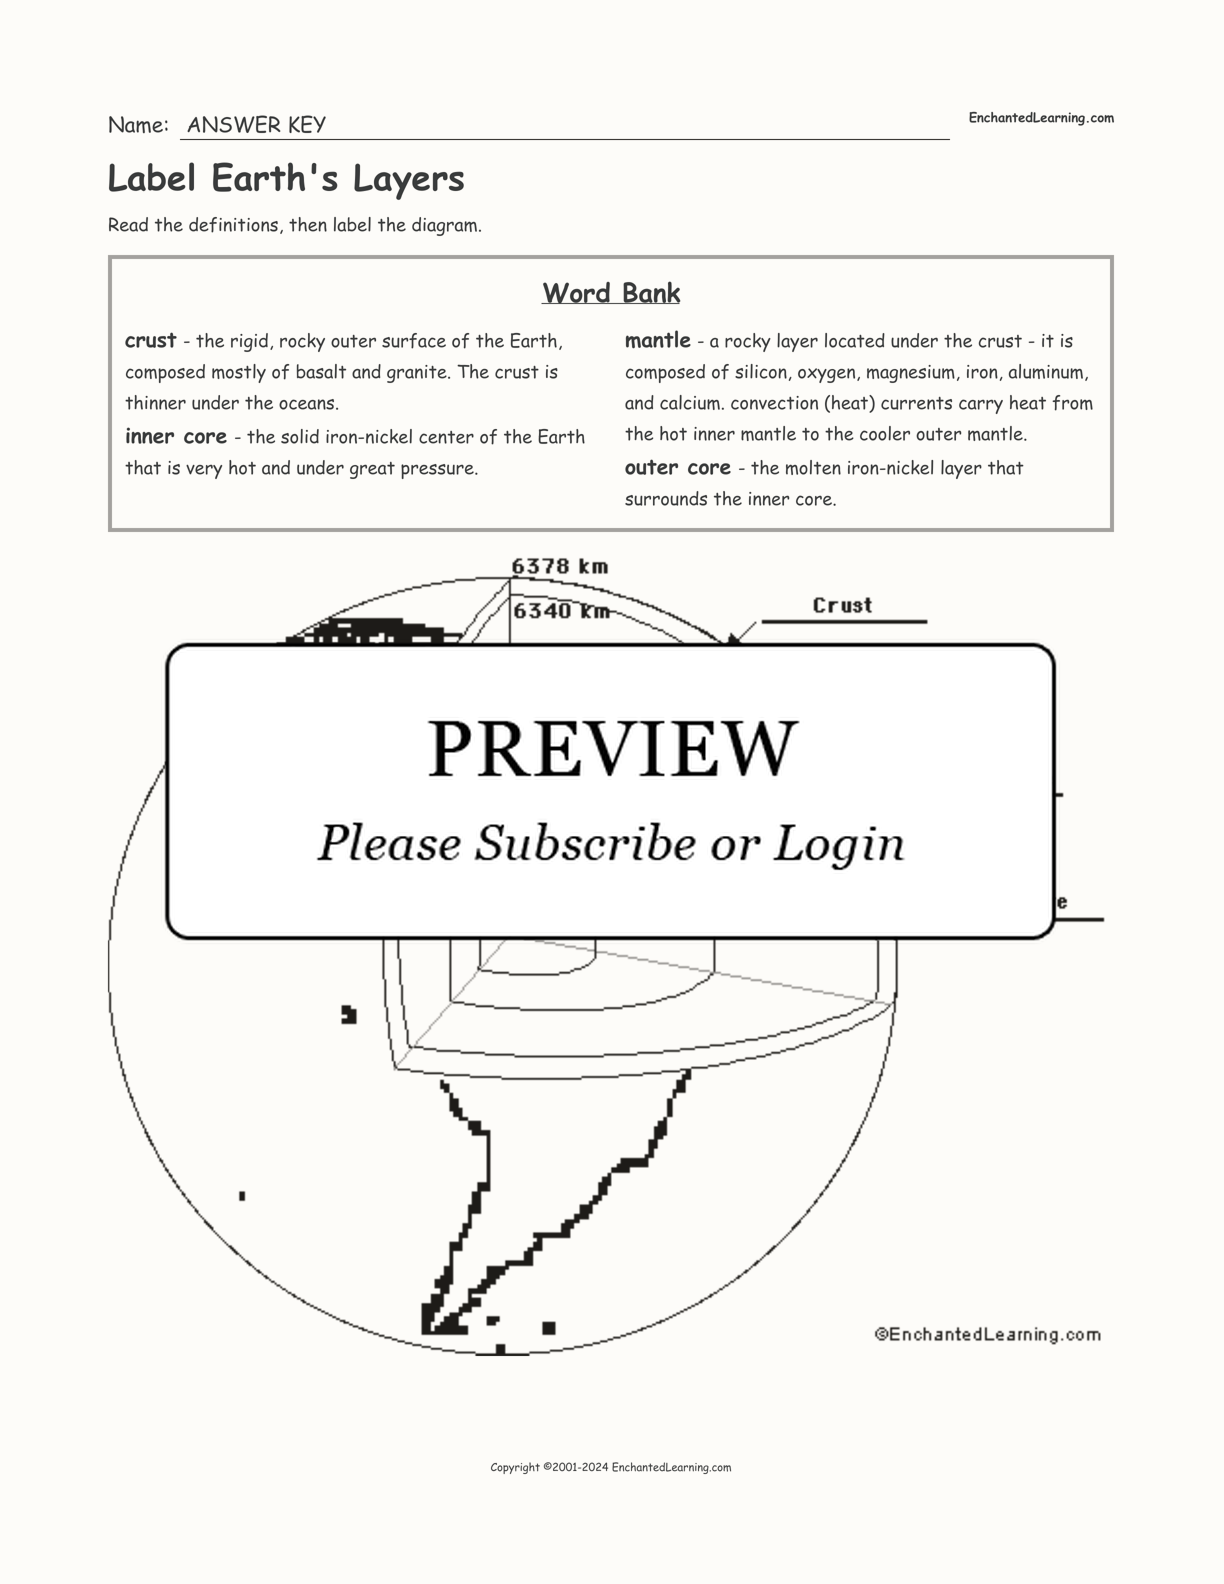 Label Earth's Layers interactive worksheet page 2